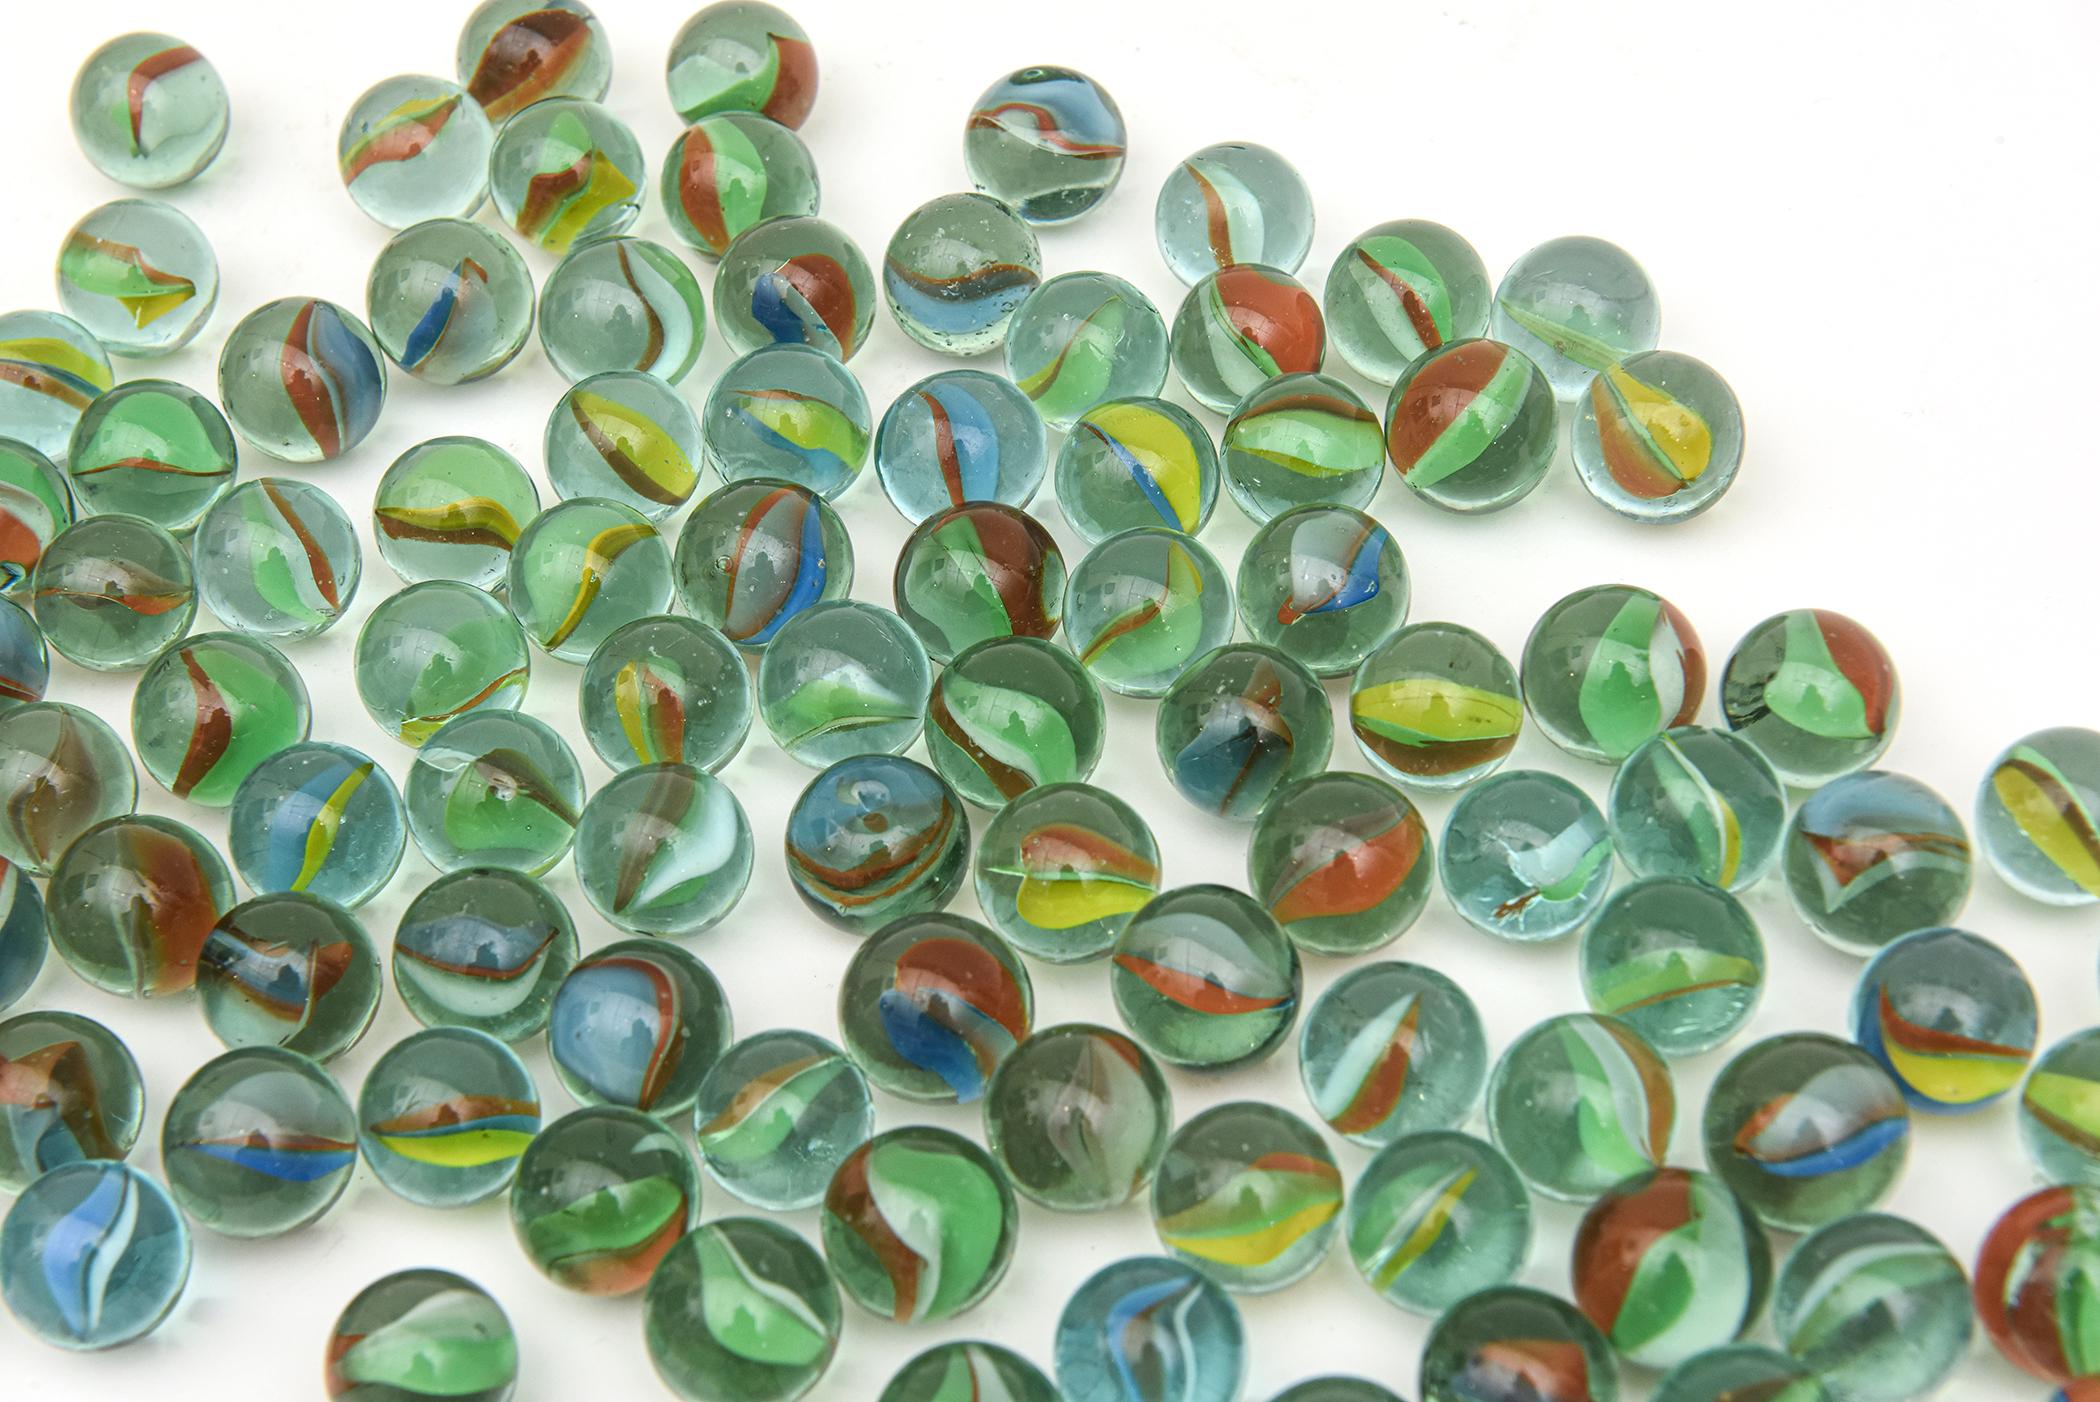 This delightful collection of cats eye vintage marbles are vintage from the 50's. There are 234 of them and sold as the collection only. The colors are beautiful of greens, blues, red and varying shades. The marble dish they were photographed on